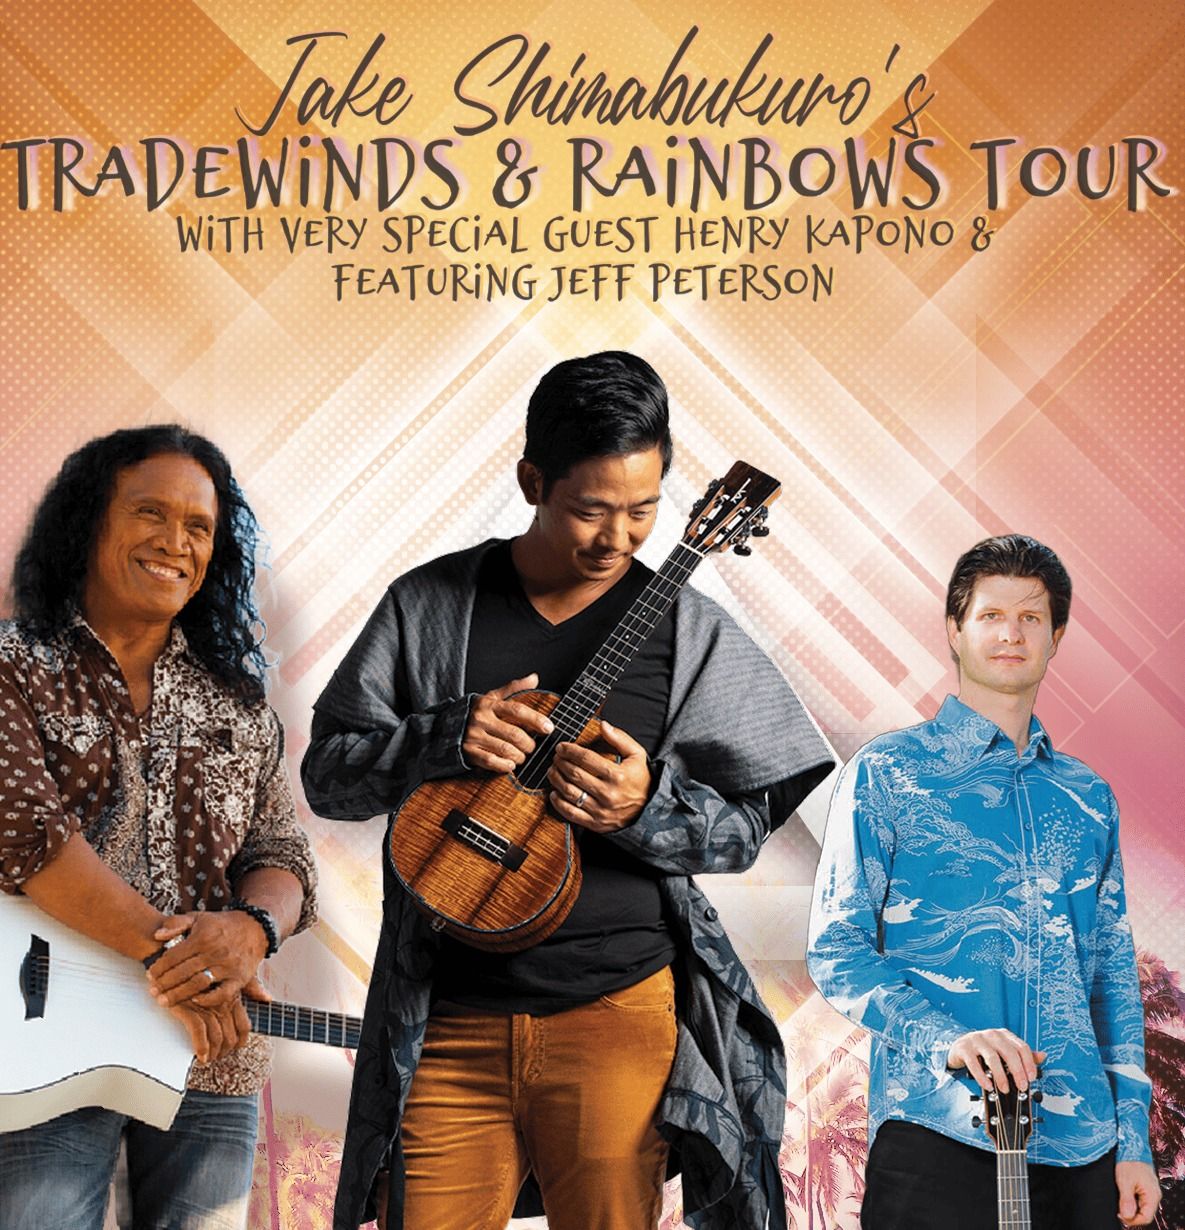 Jake Shimabukuro's Tradewinds & Rainbows Tour With Very Special Guests